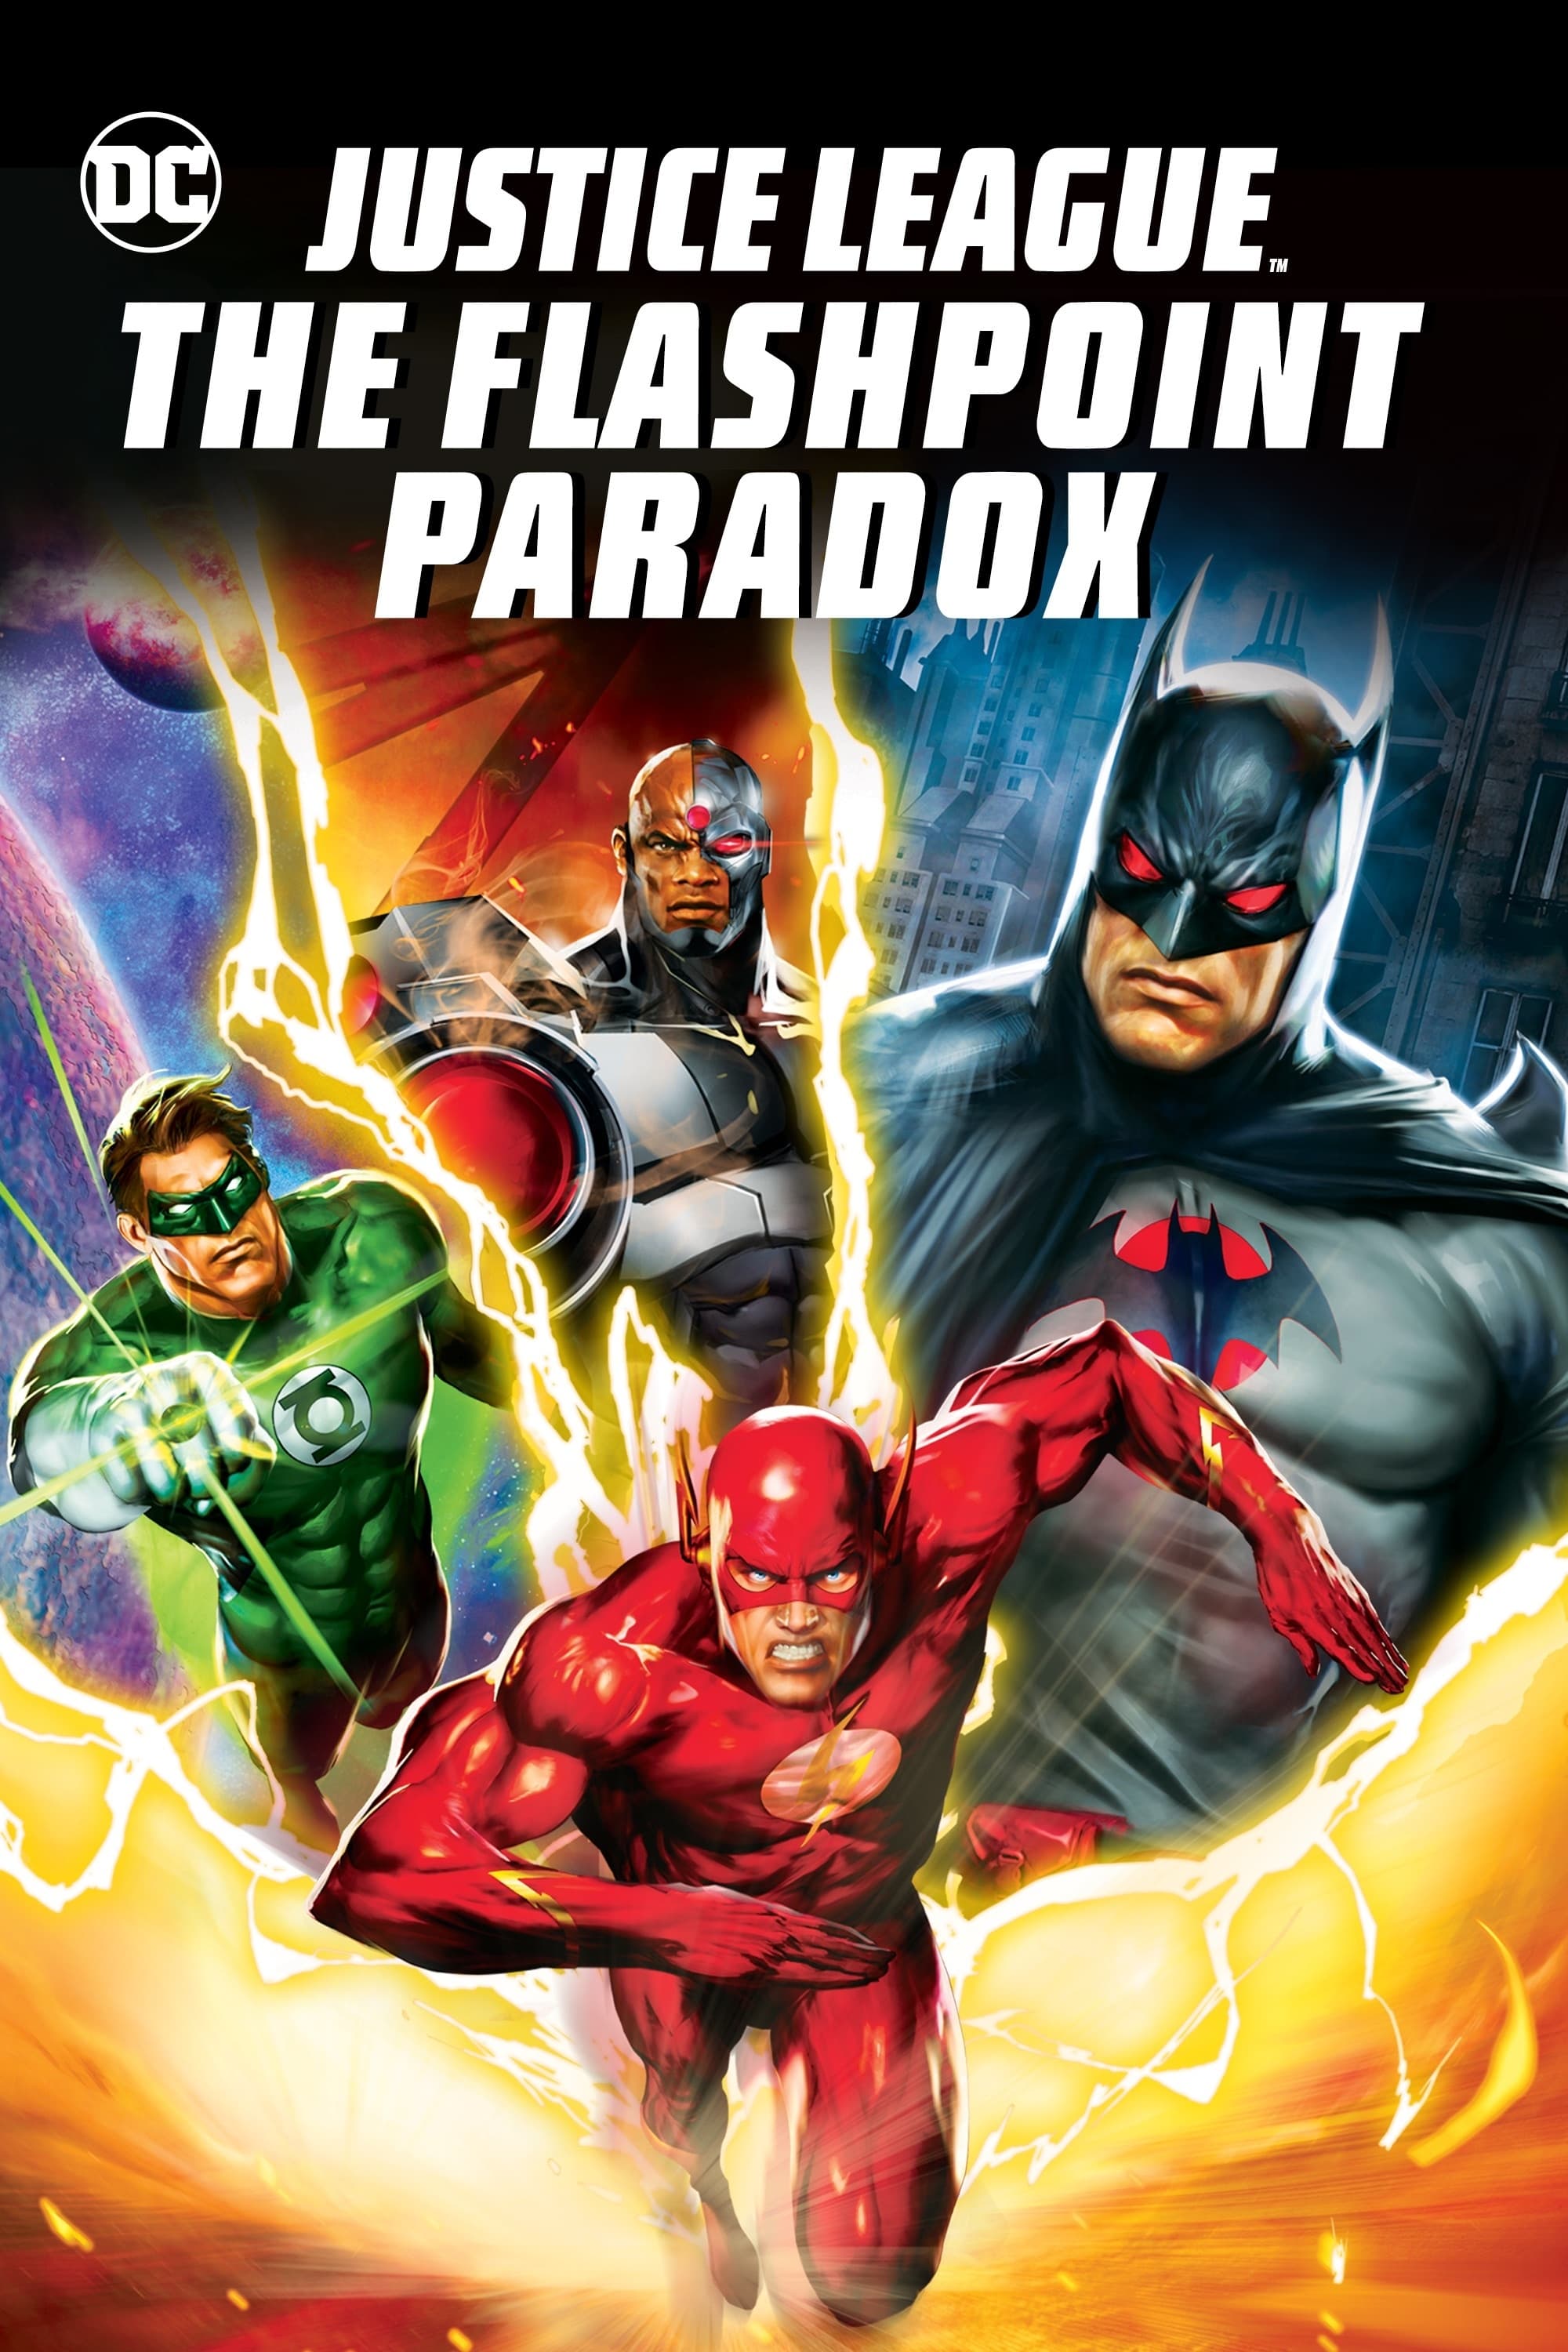 Justice League: The Flashpoint Paradox film